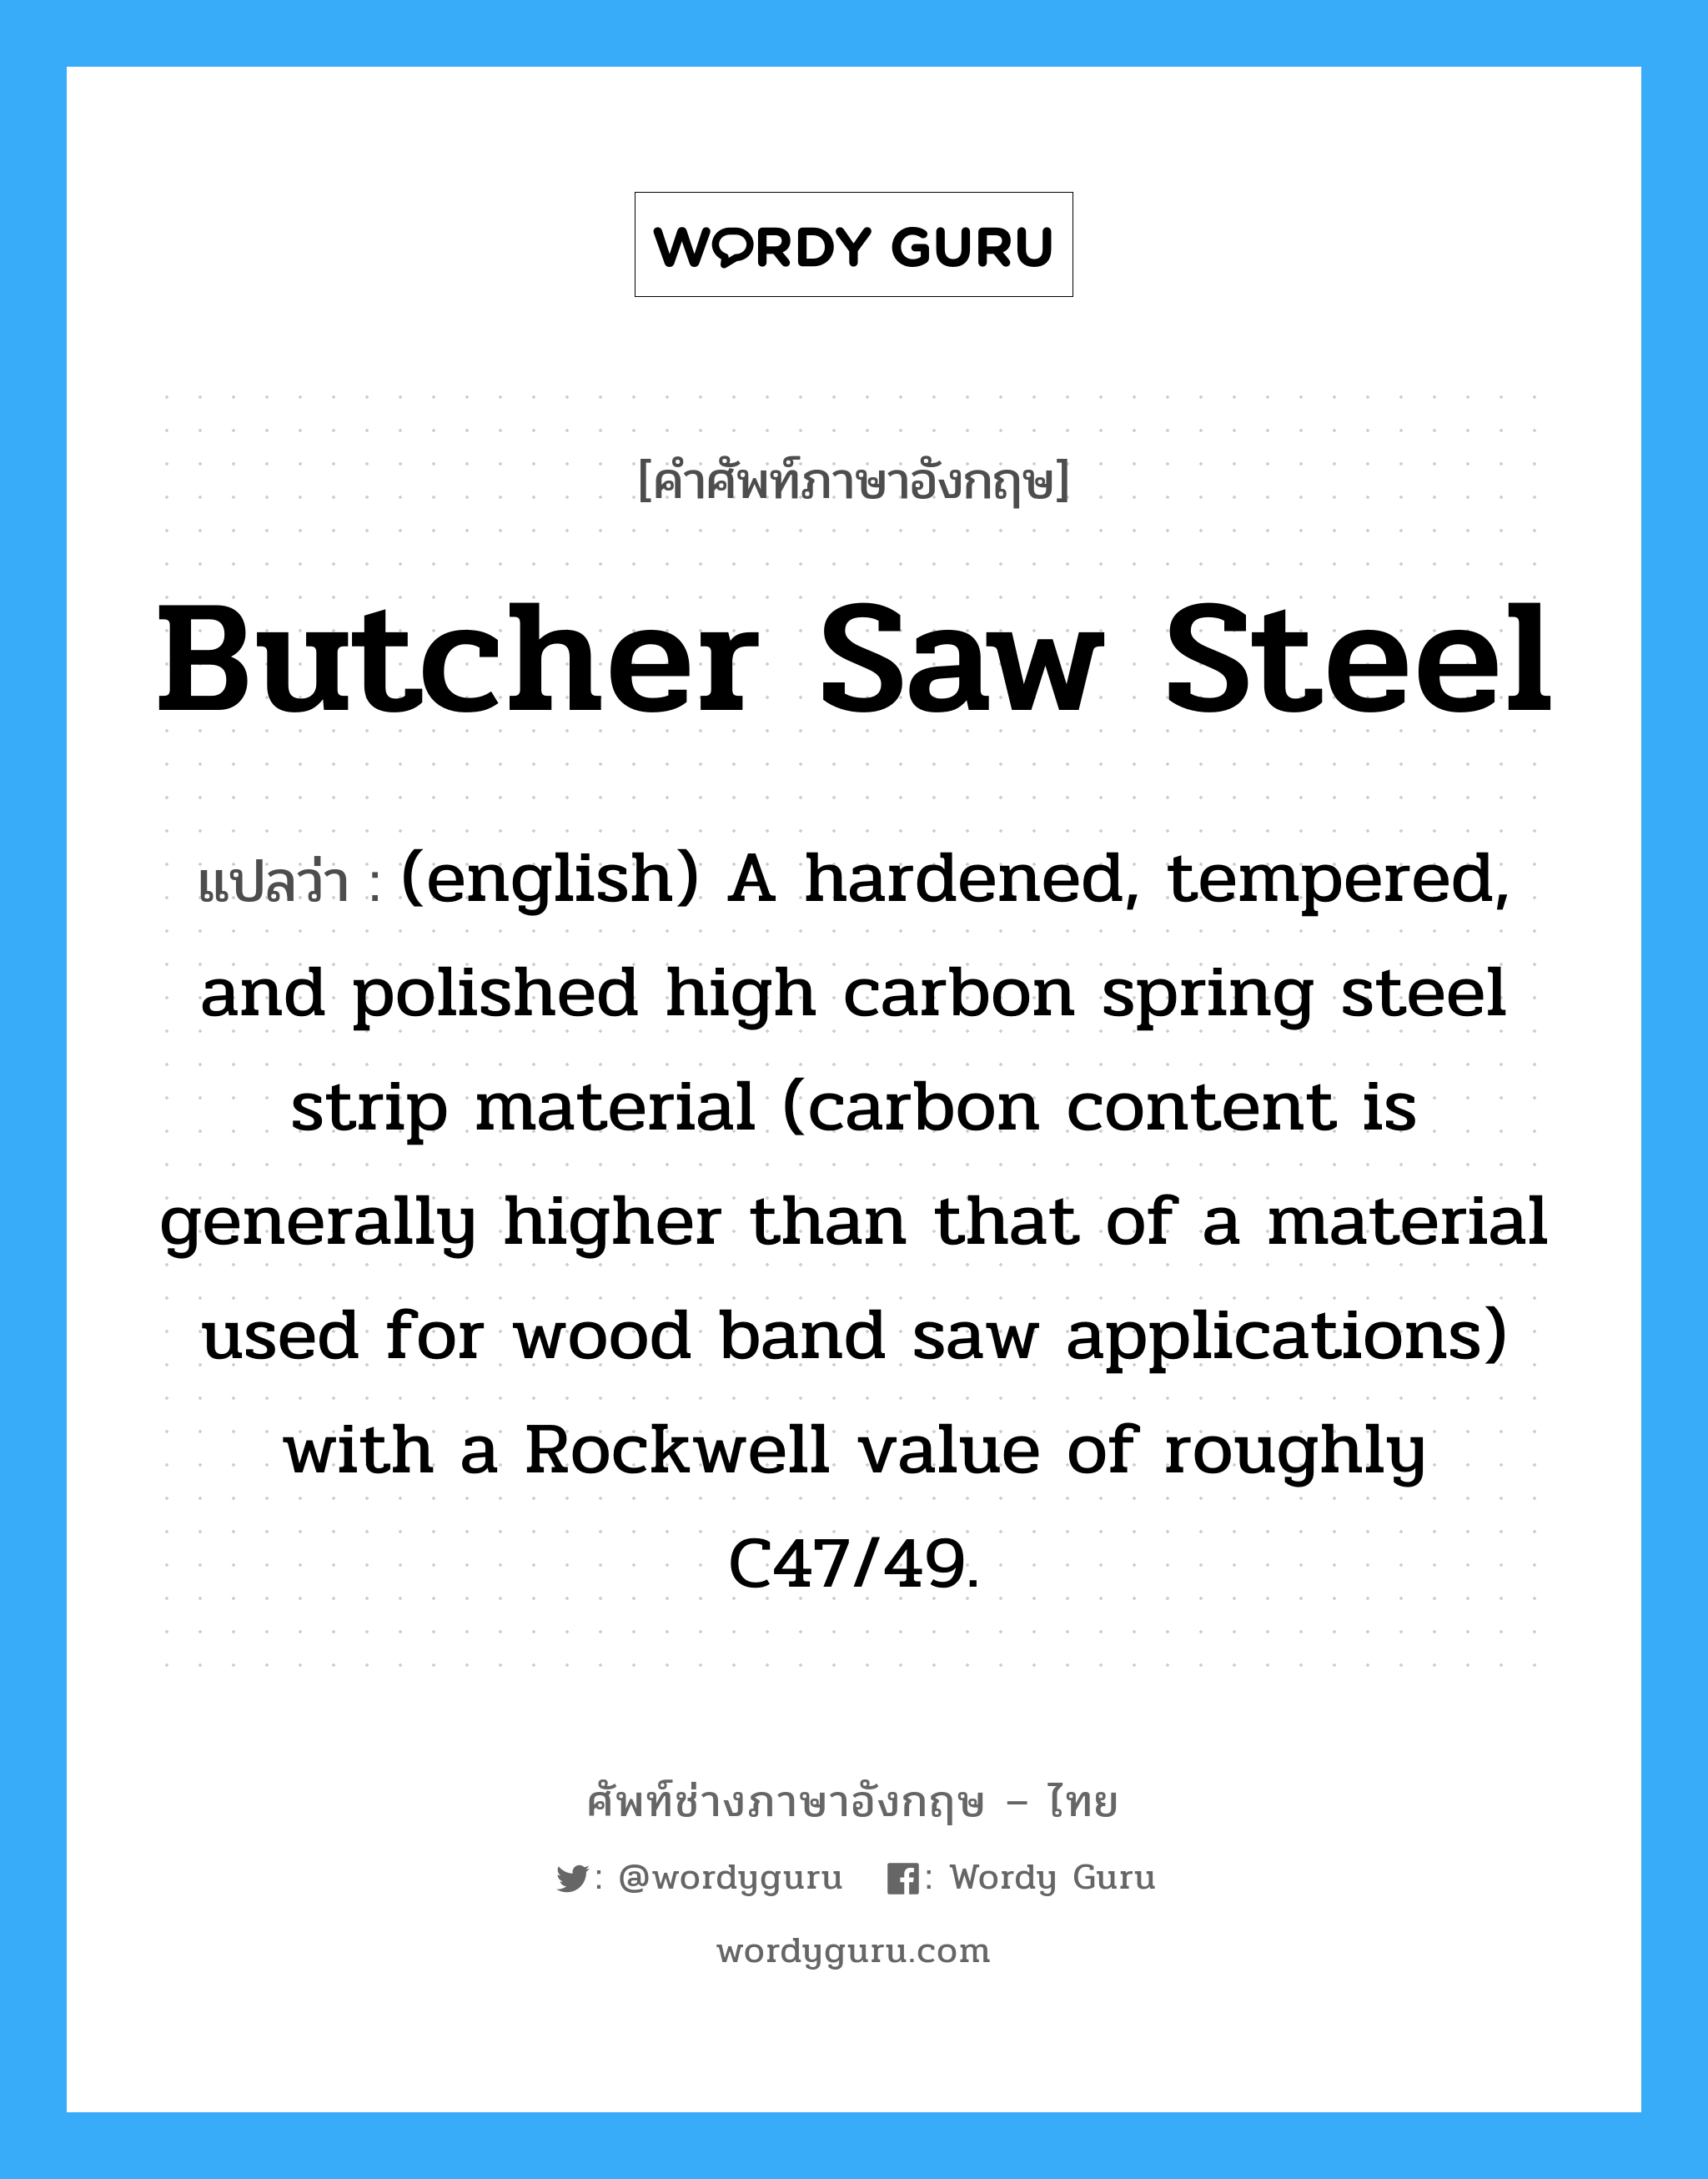 Butcher Saw Steel แปลว่า?, คำศัพท์ช่างภาษาอังกฤษ - ไทย Butcher Saw Steel คำศัพท์ภาษาอังกฤษ Butcher Saw Steel แปลว่า (english) A hardened, tempered, and polished high carbon spring steel strip material (carbon content is generally higher than that of a material used for wood band saw applications) with a Rockwell value of roughly C47/49.